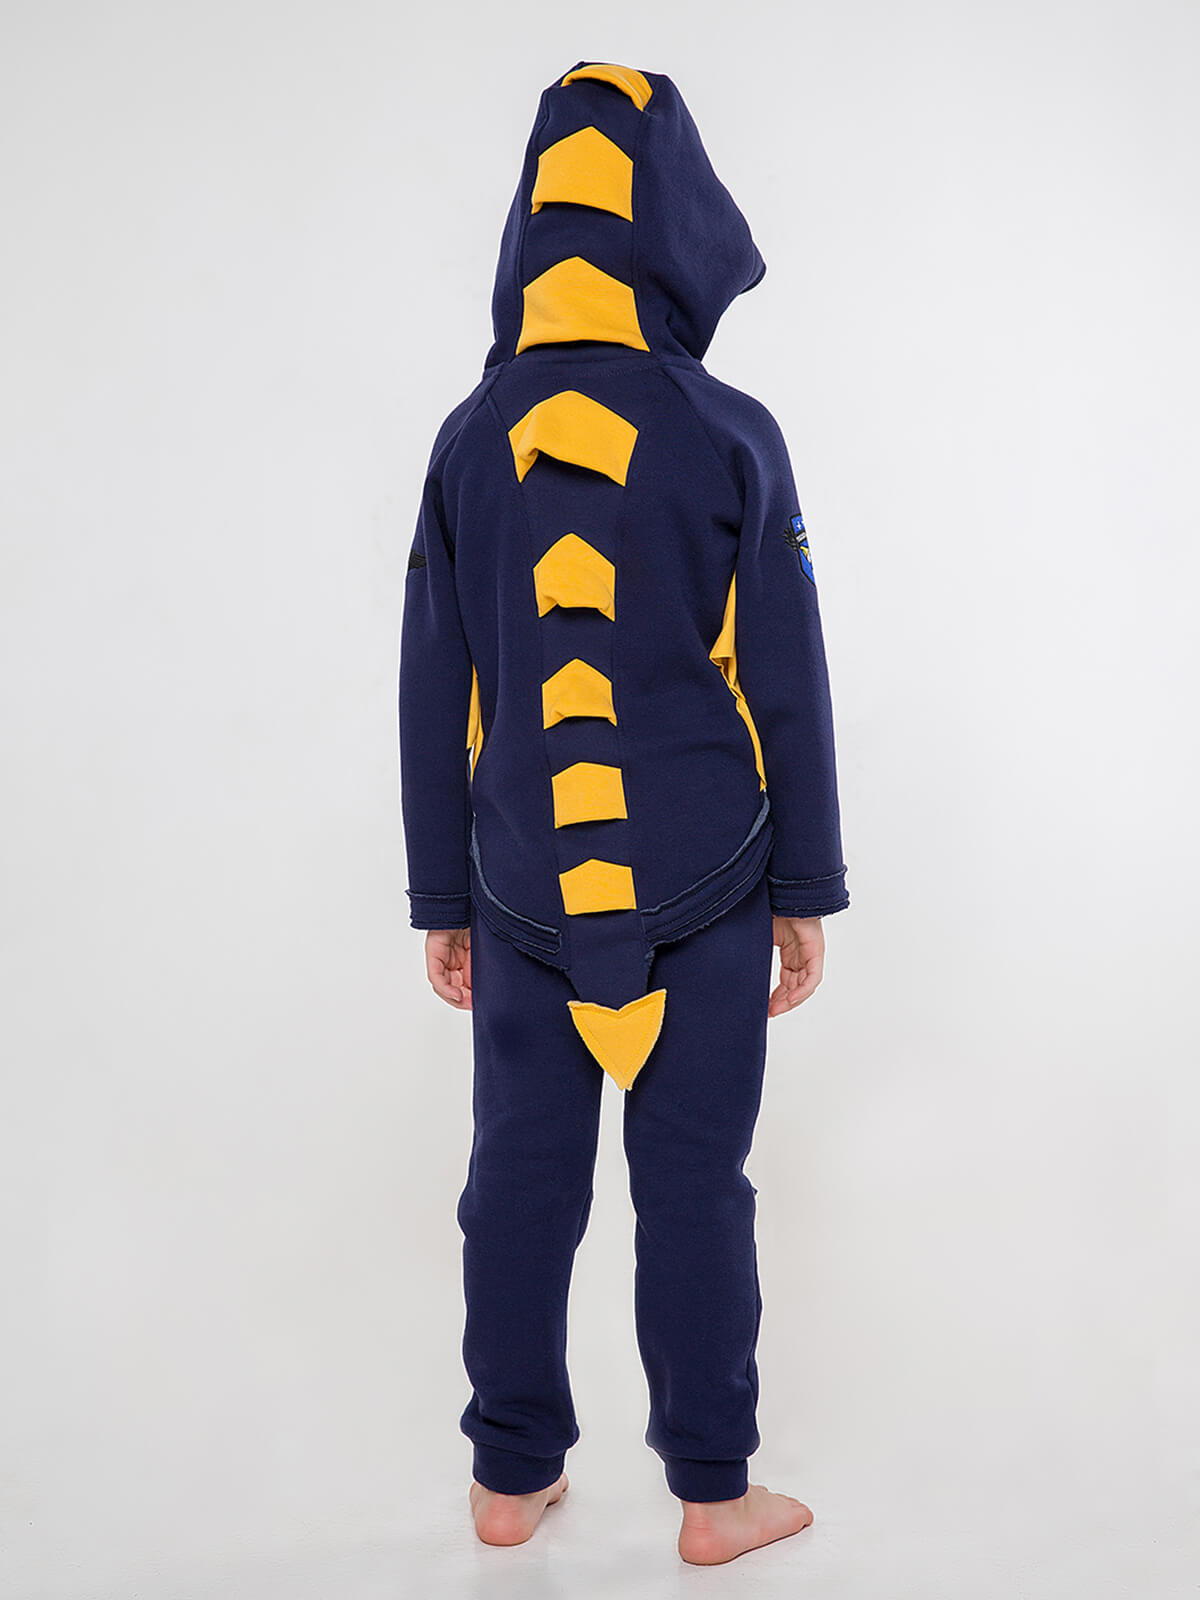 Kids Hoodie Dragon. Color dark blue. 
Material of the hoodie – three-cord thread fabric: 77% cotton, 23% polyester.